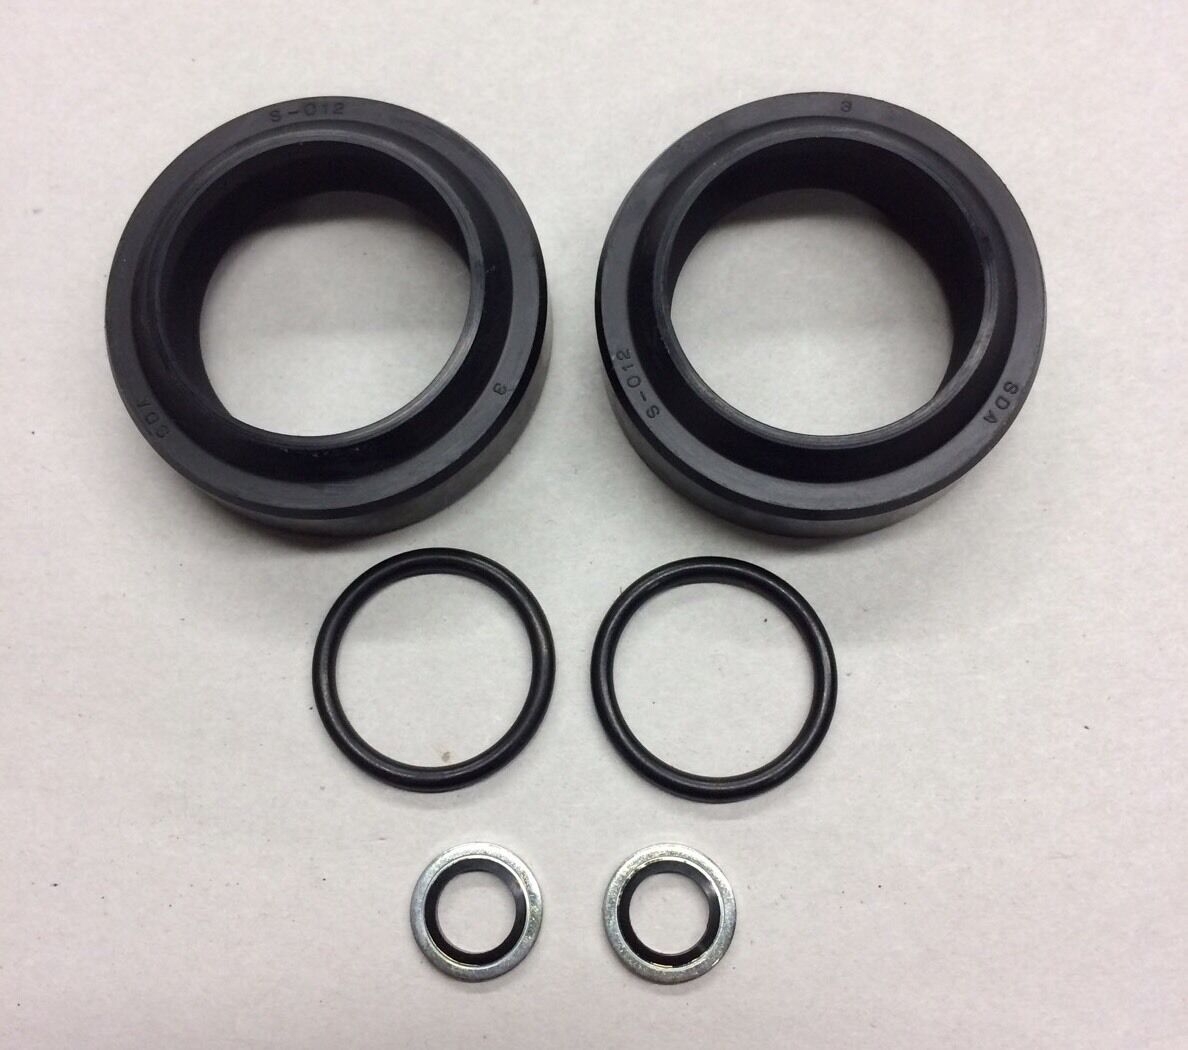 Triumph Fork Seal Kit T140T120 TR6 T100 - 650 1971-1974 500 1973 750 All Years